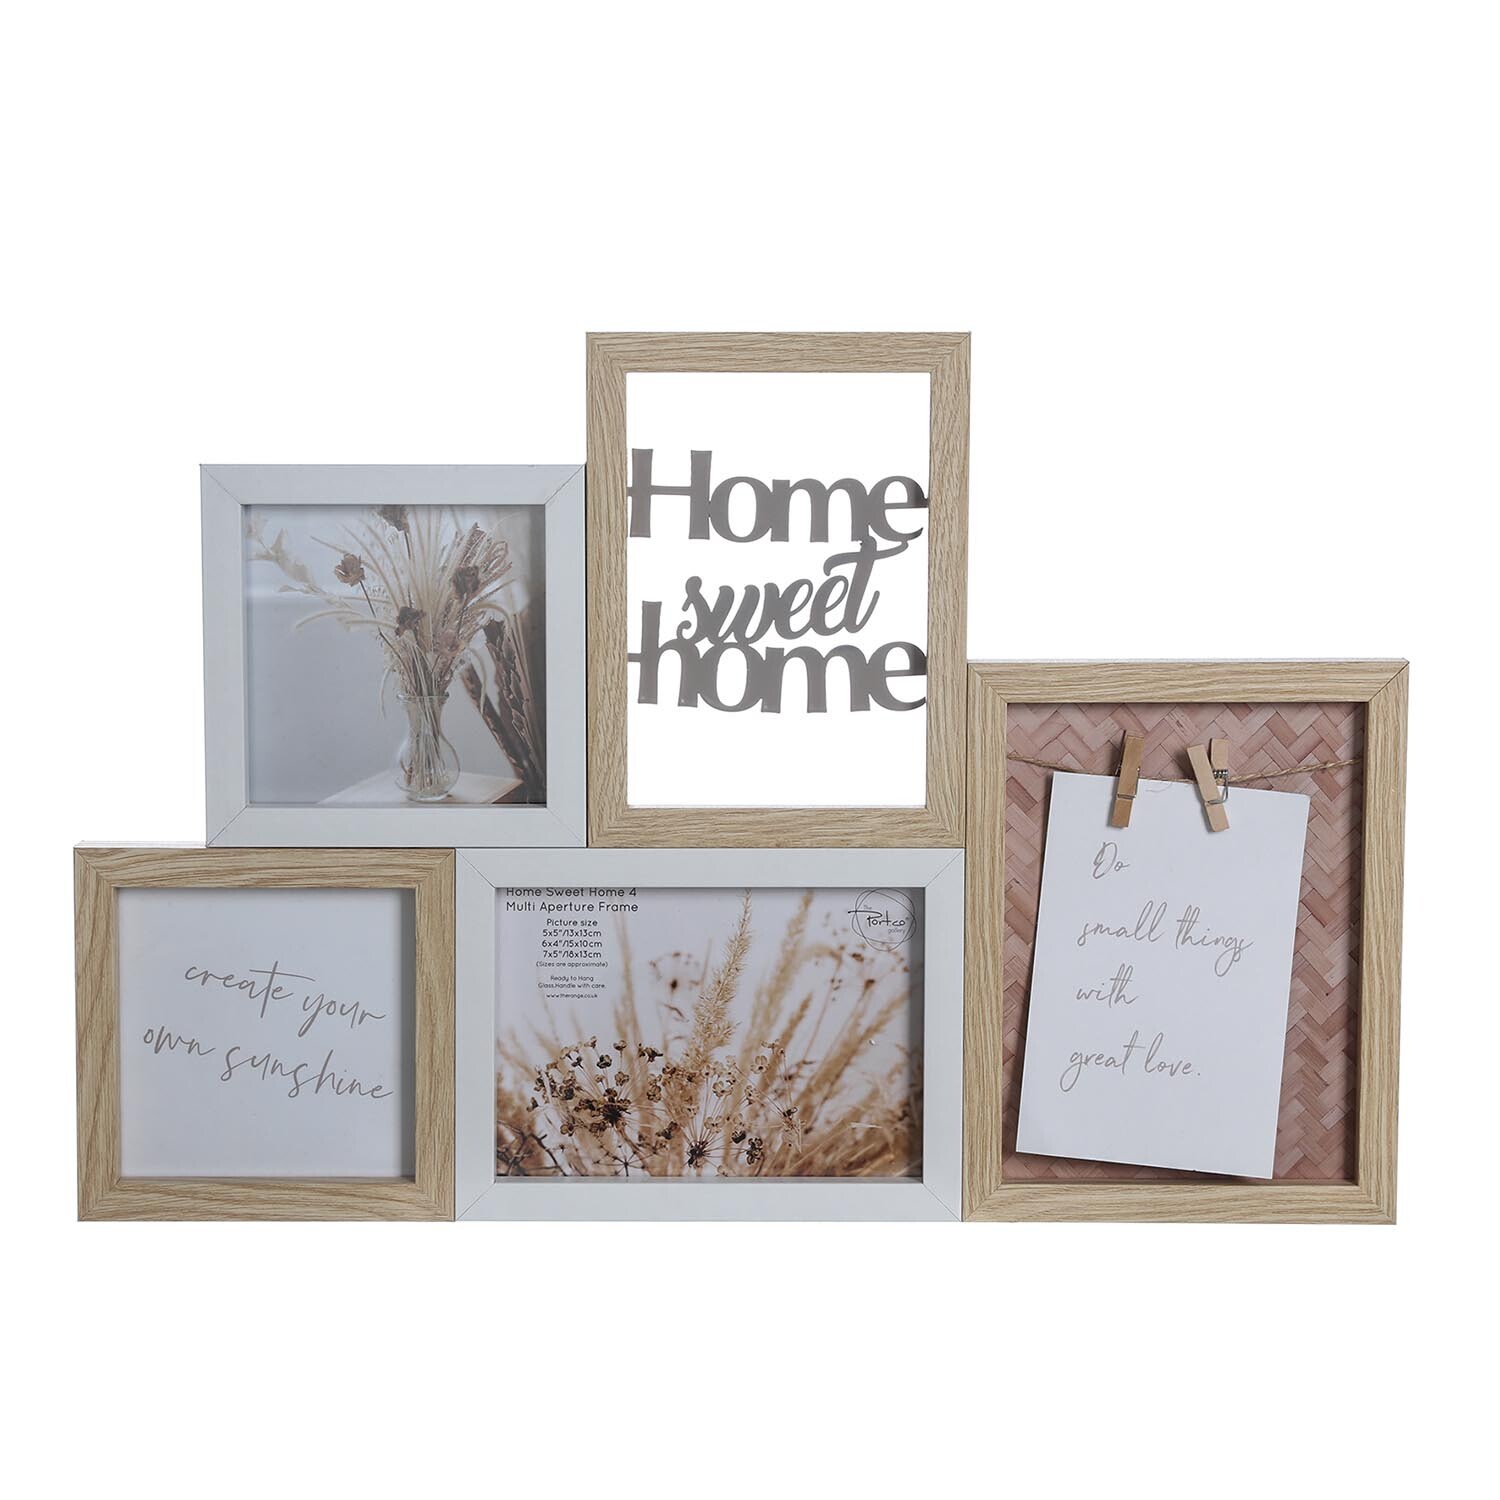 Home Sweet Home Multi-Aperture Frame - Brown Image